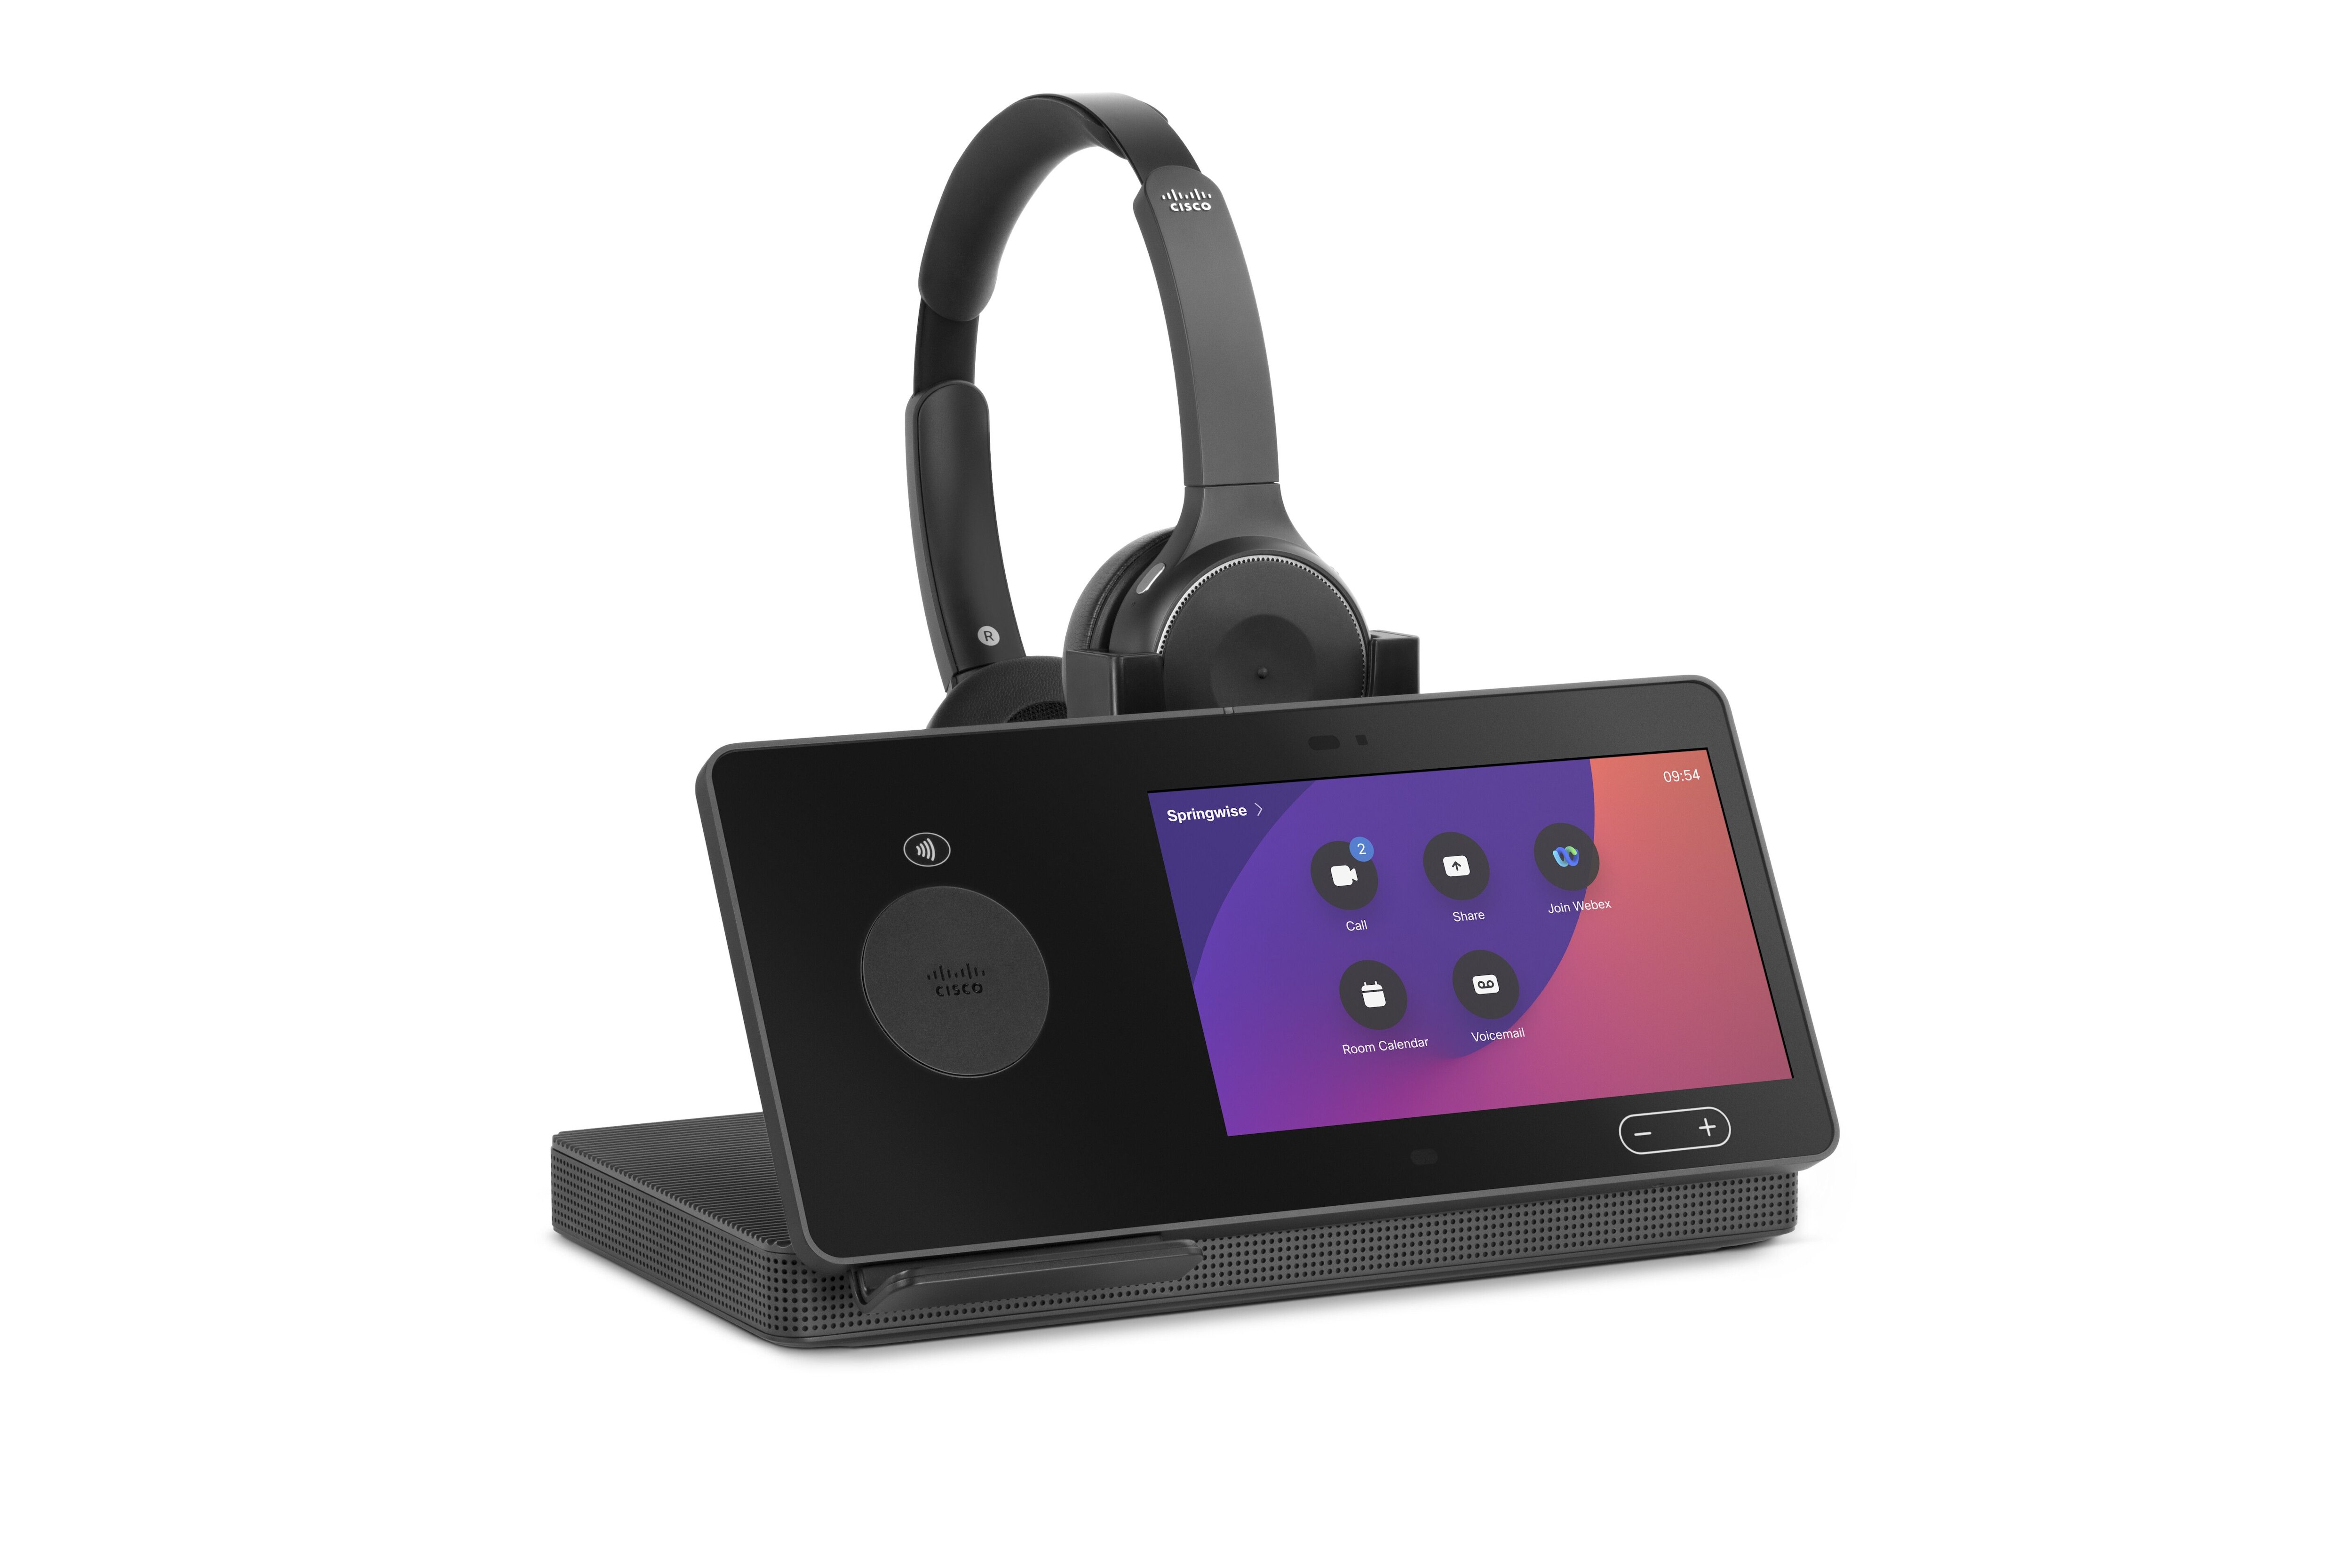 The Webex Desk Hub shows a bright homescreen with five apps visible and a headset docked on the charging station.